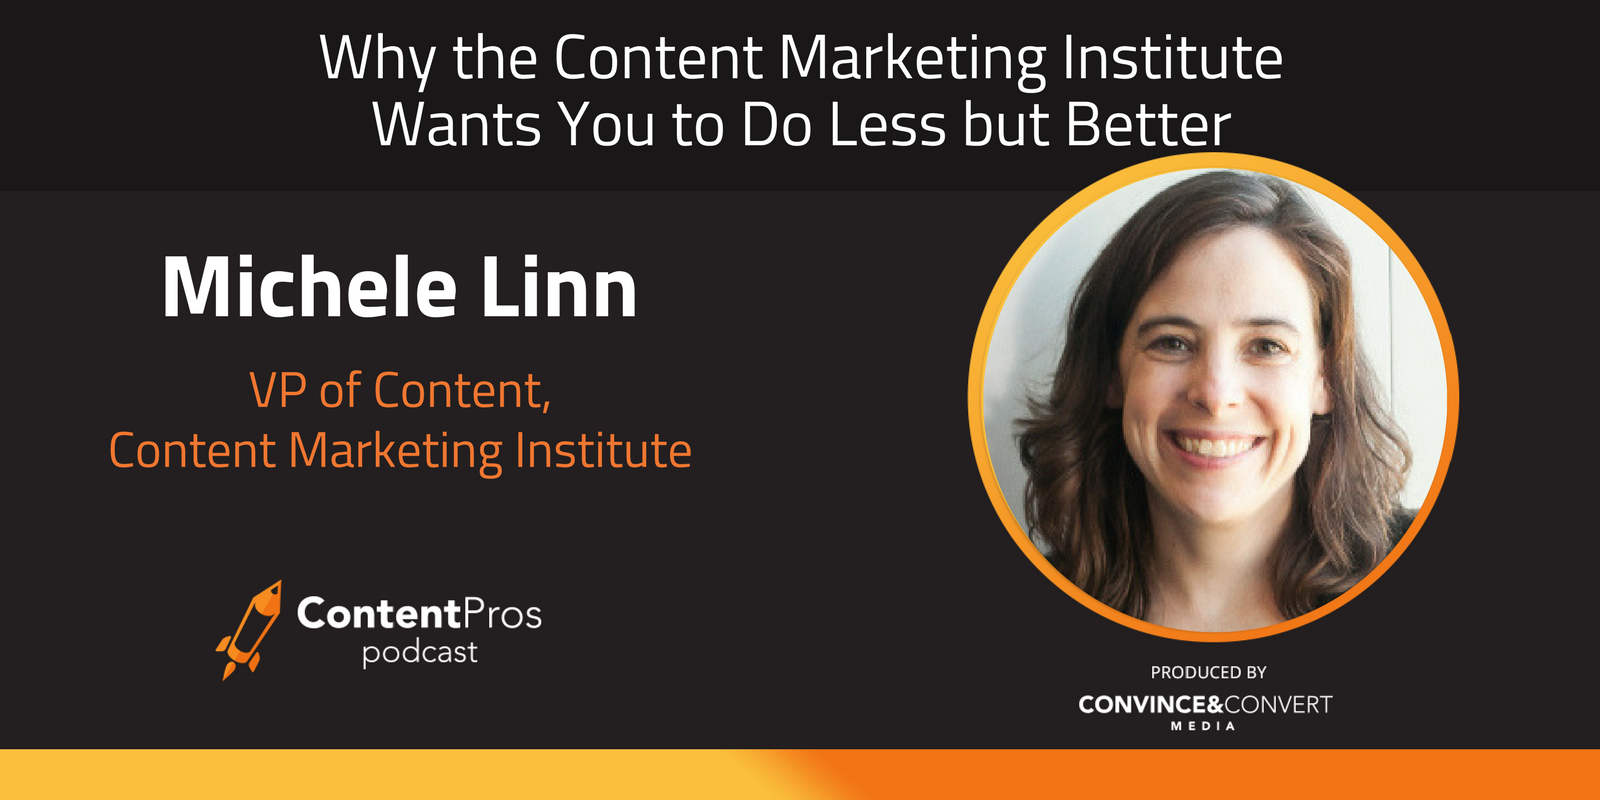 Why the Content Marketing Institute Wants You to Do Less but Better